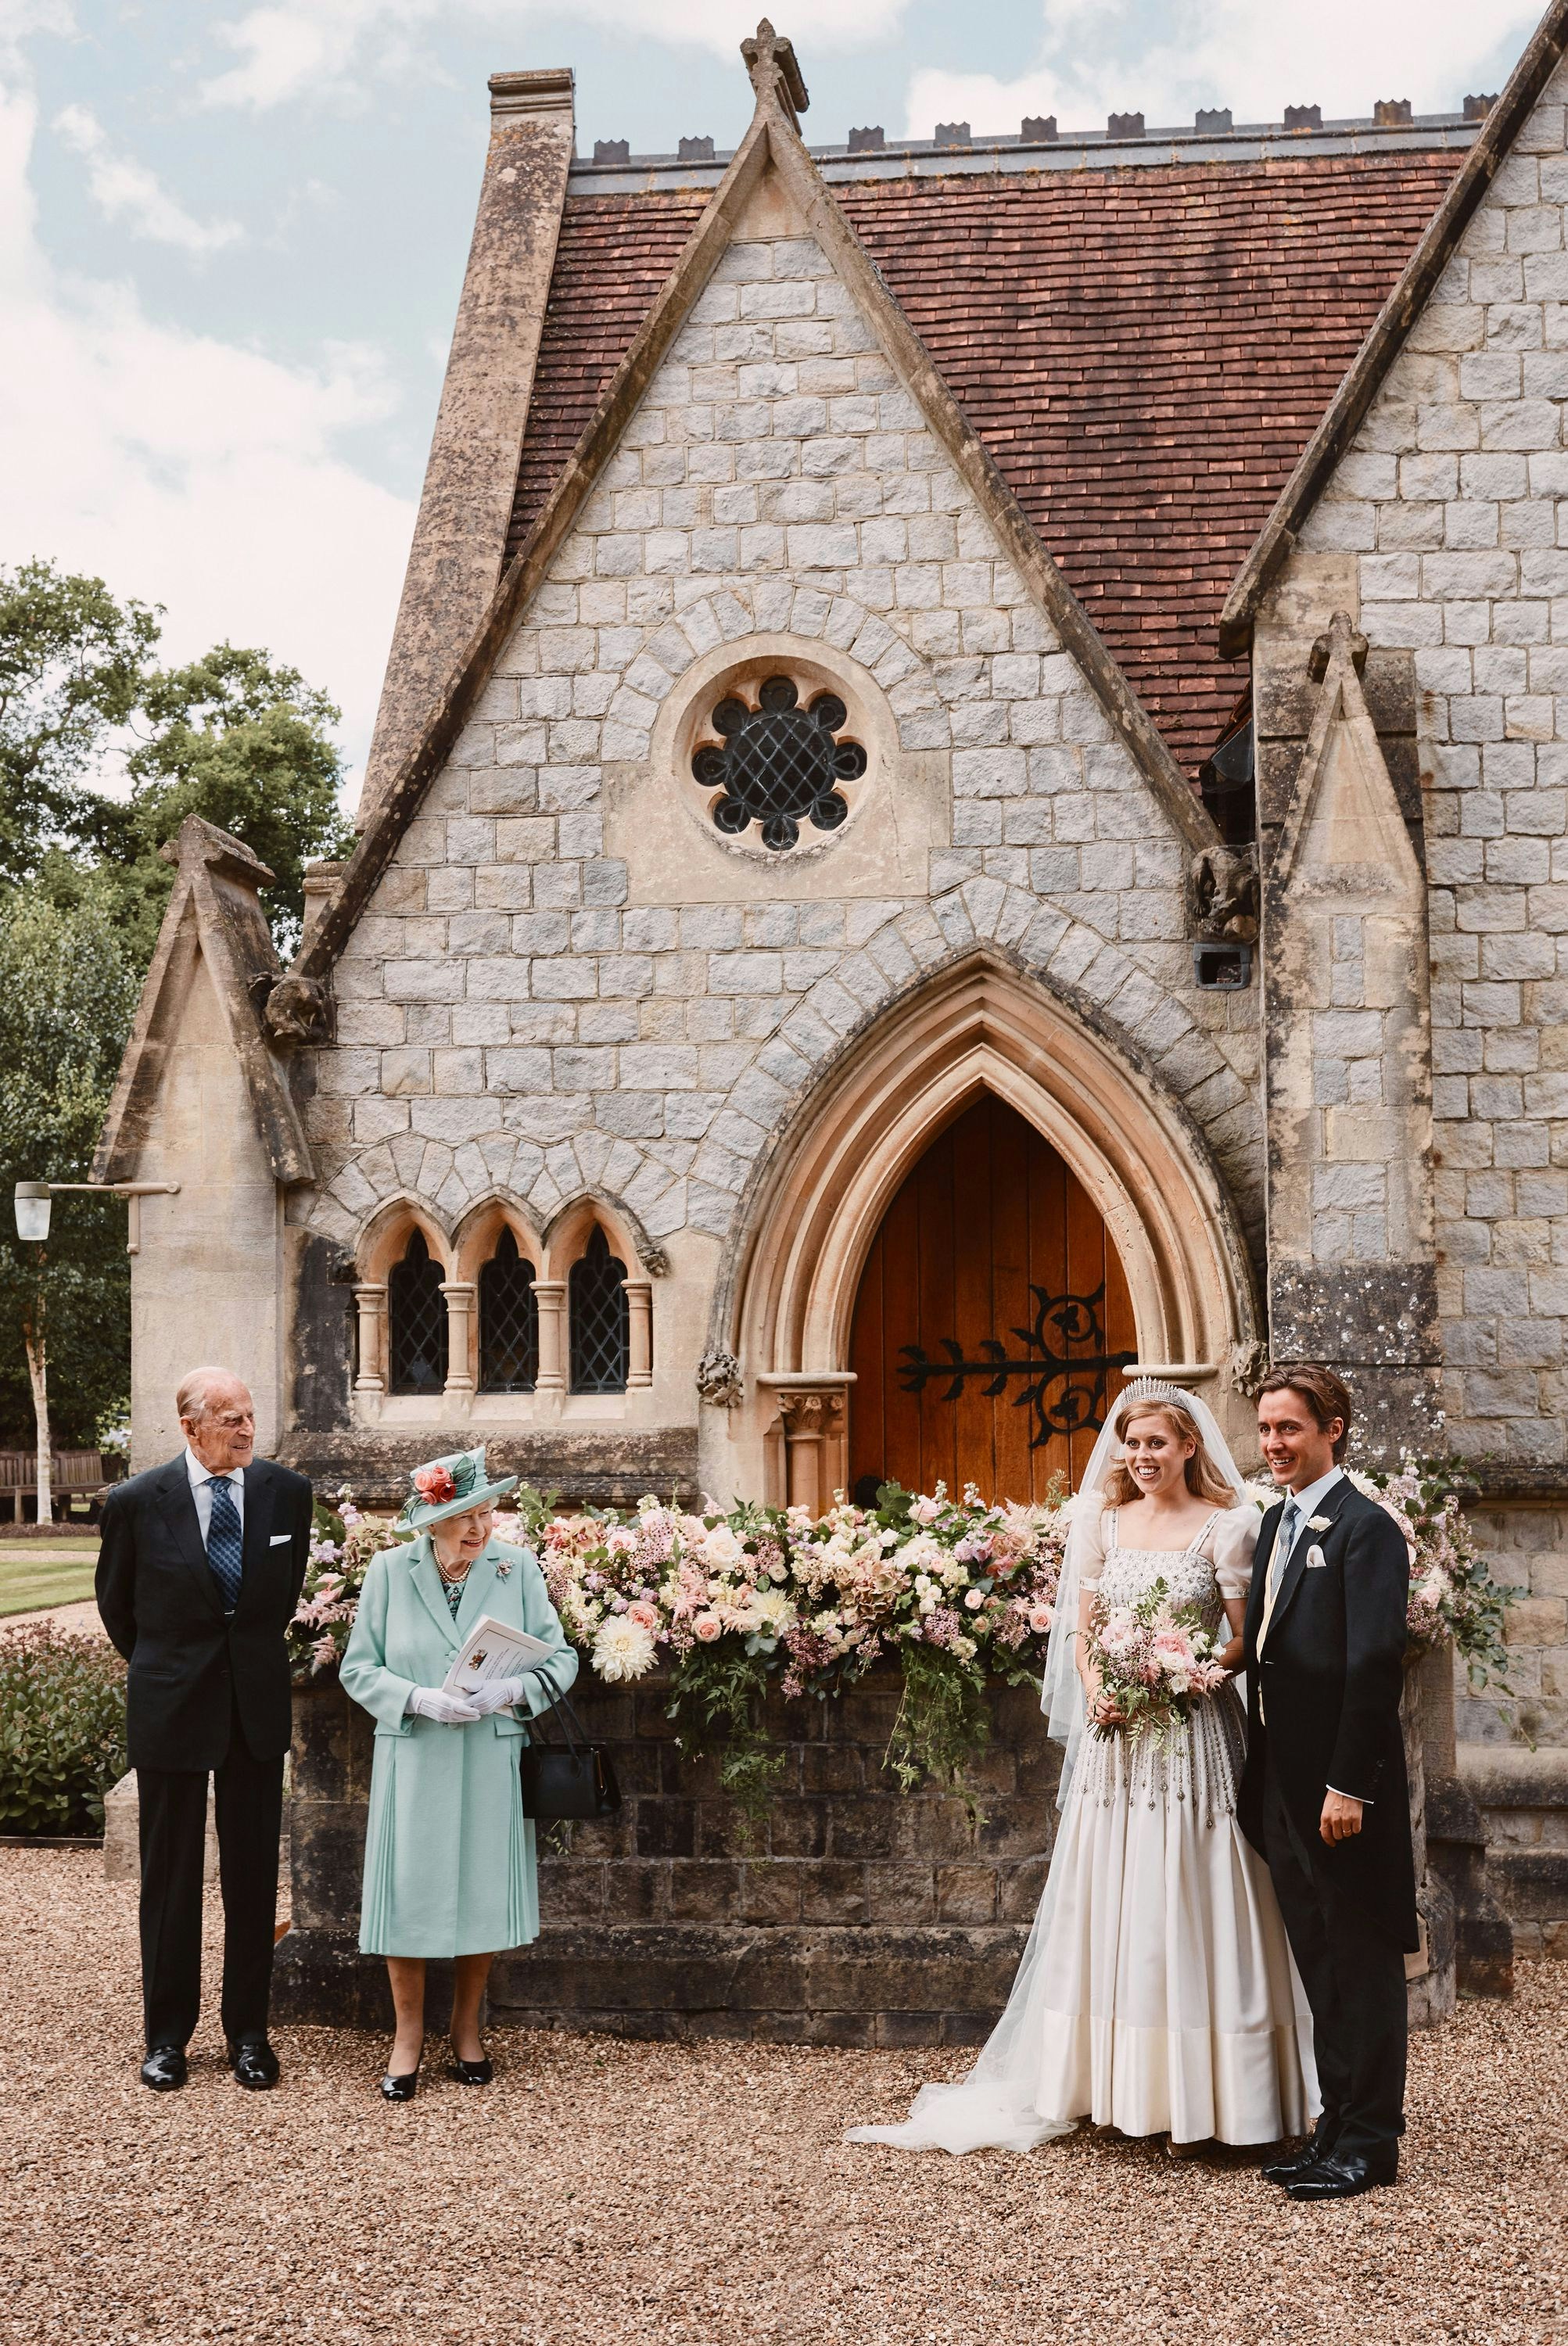 Queen Elizabeth, Prince Phillip stand socially distanced from Princess Beatrice and Edoardo Mapelli Mozzi on their wedding day